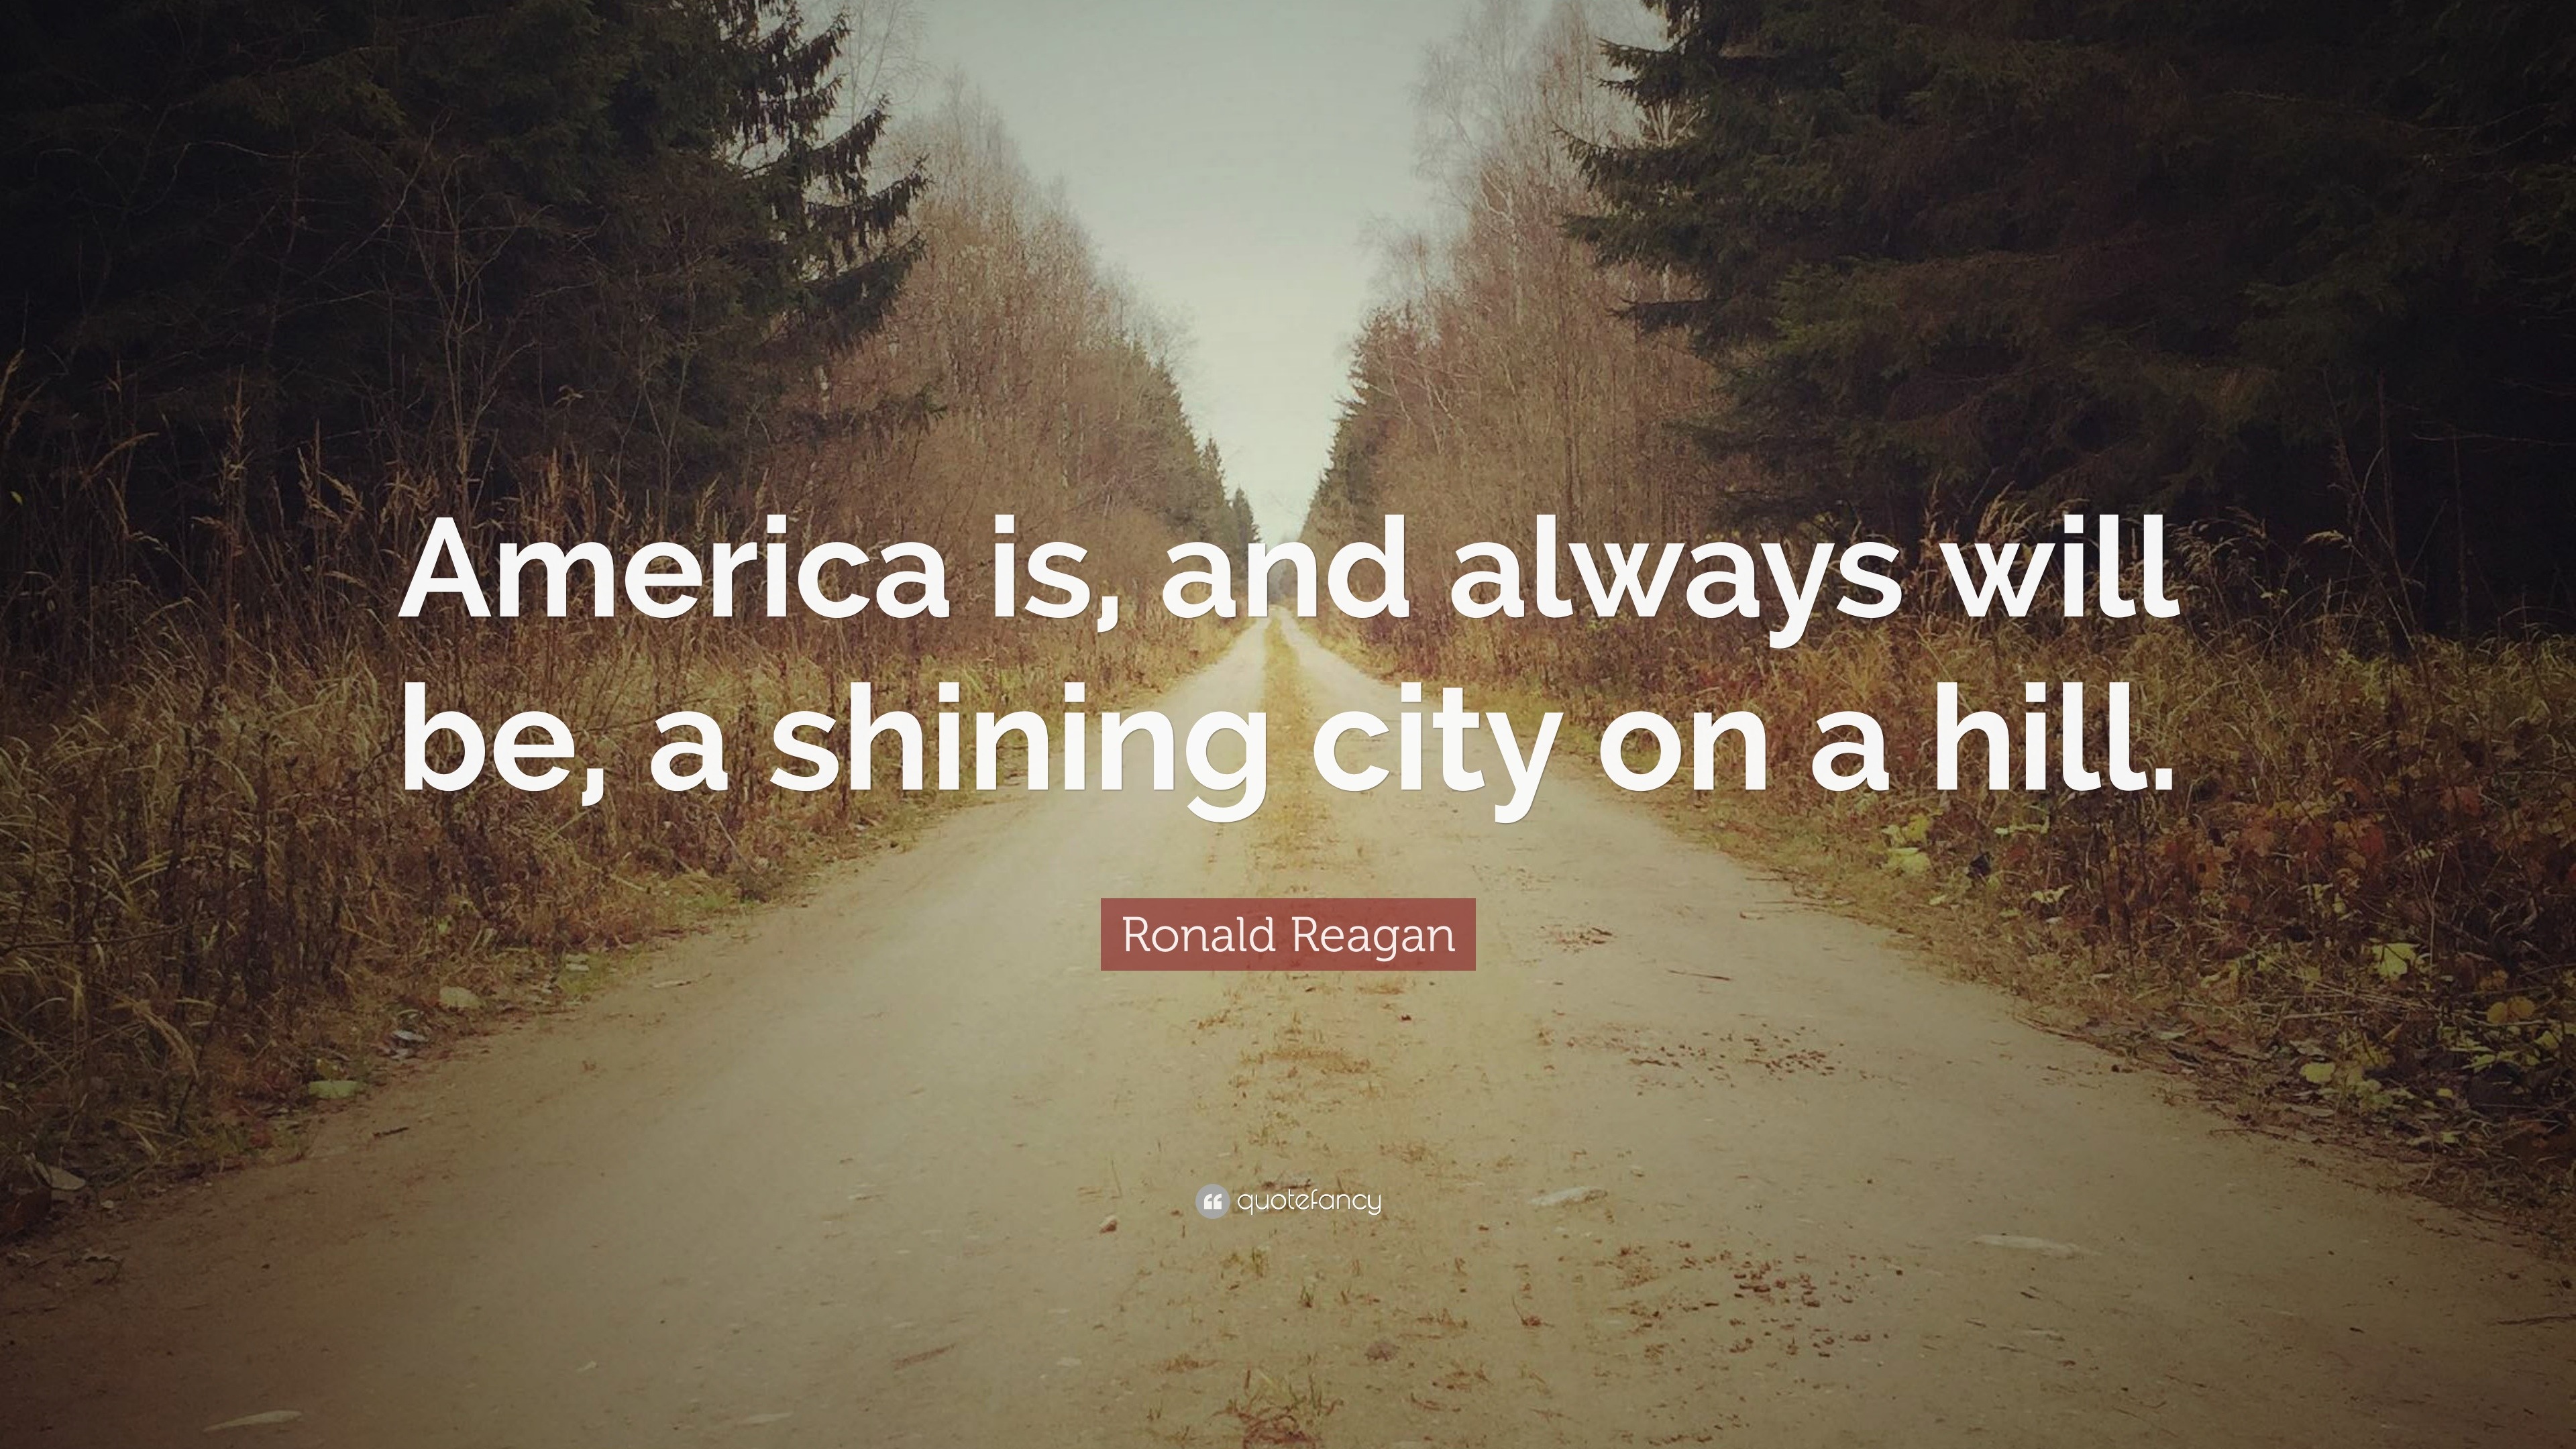 Ronald Reagan Quotes (100 wallpapers) - Quotefancy